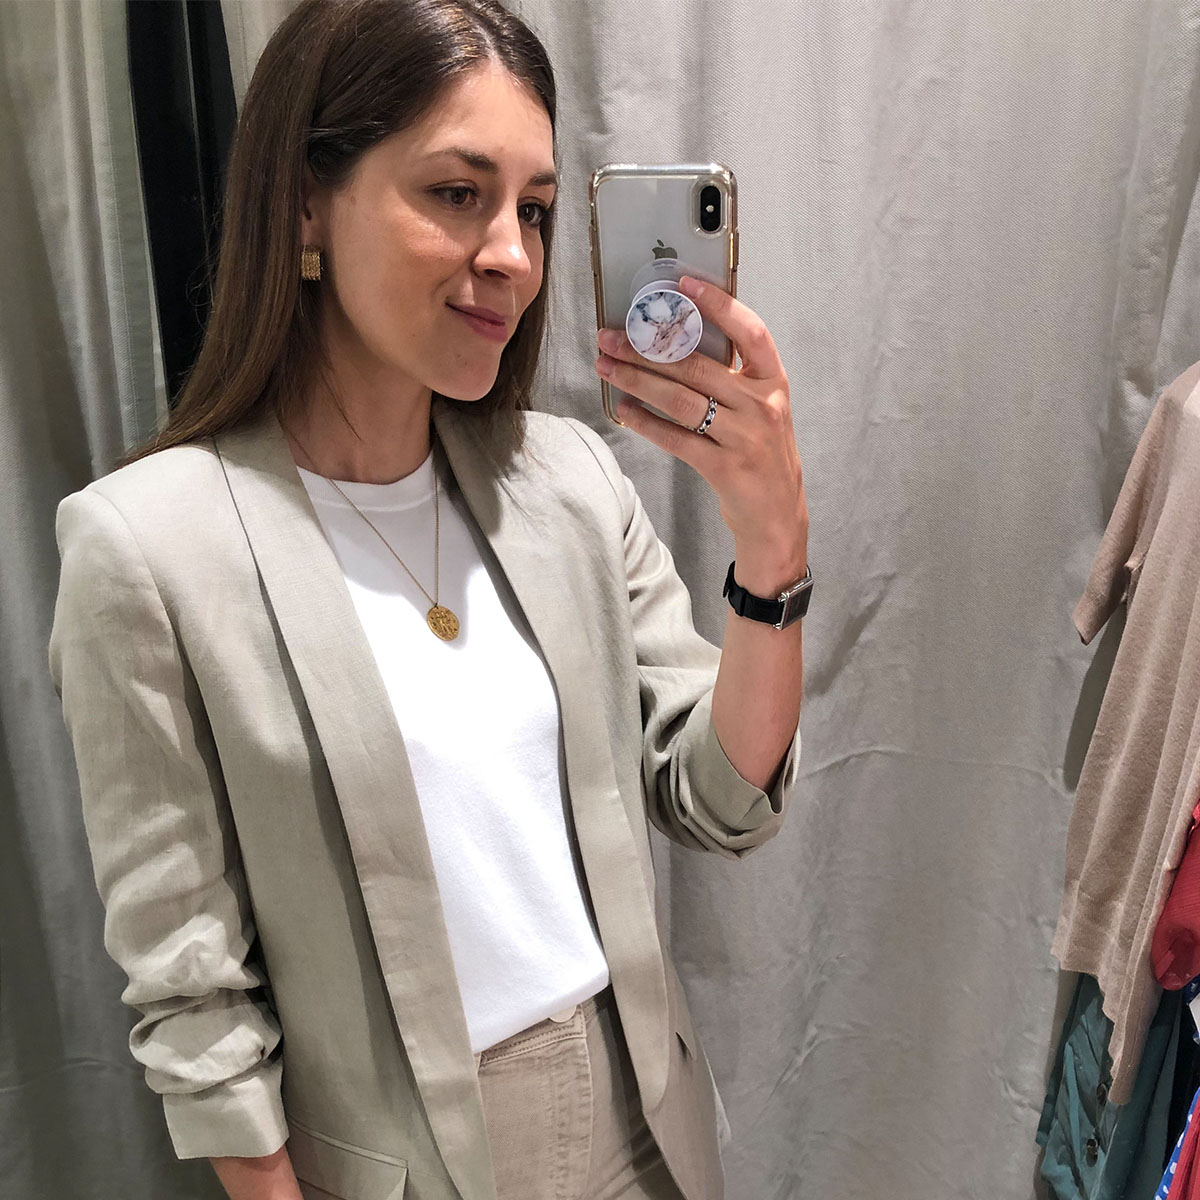 I Tried On 15 Items at Zara—This Is Hands Down the Best Buy